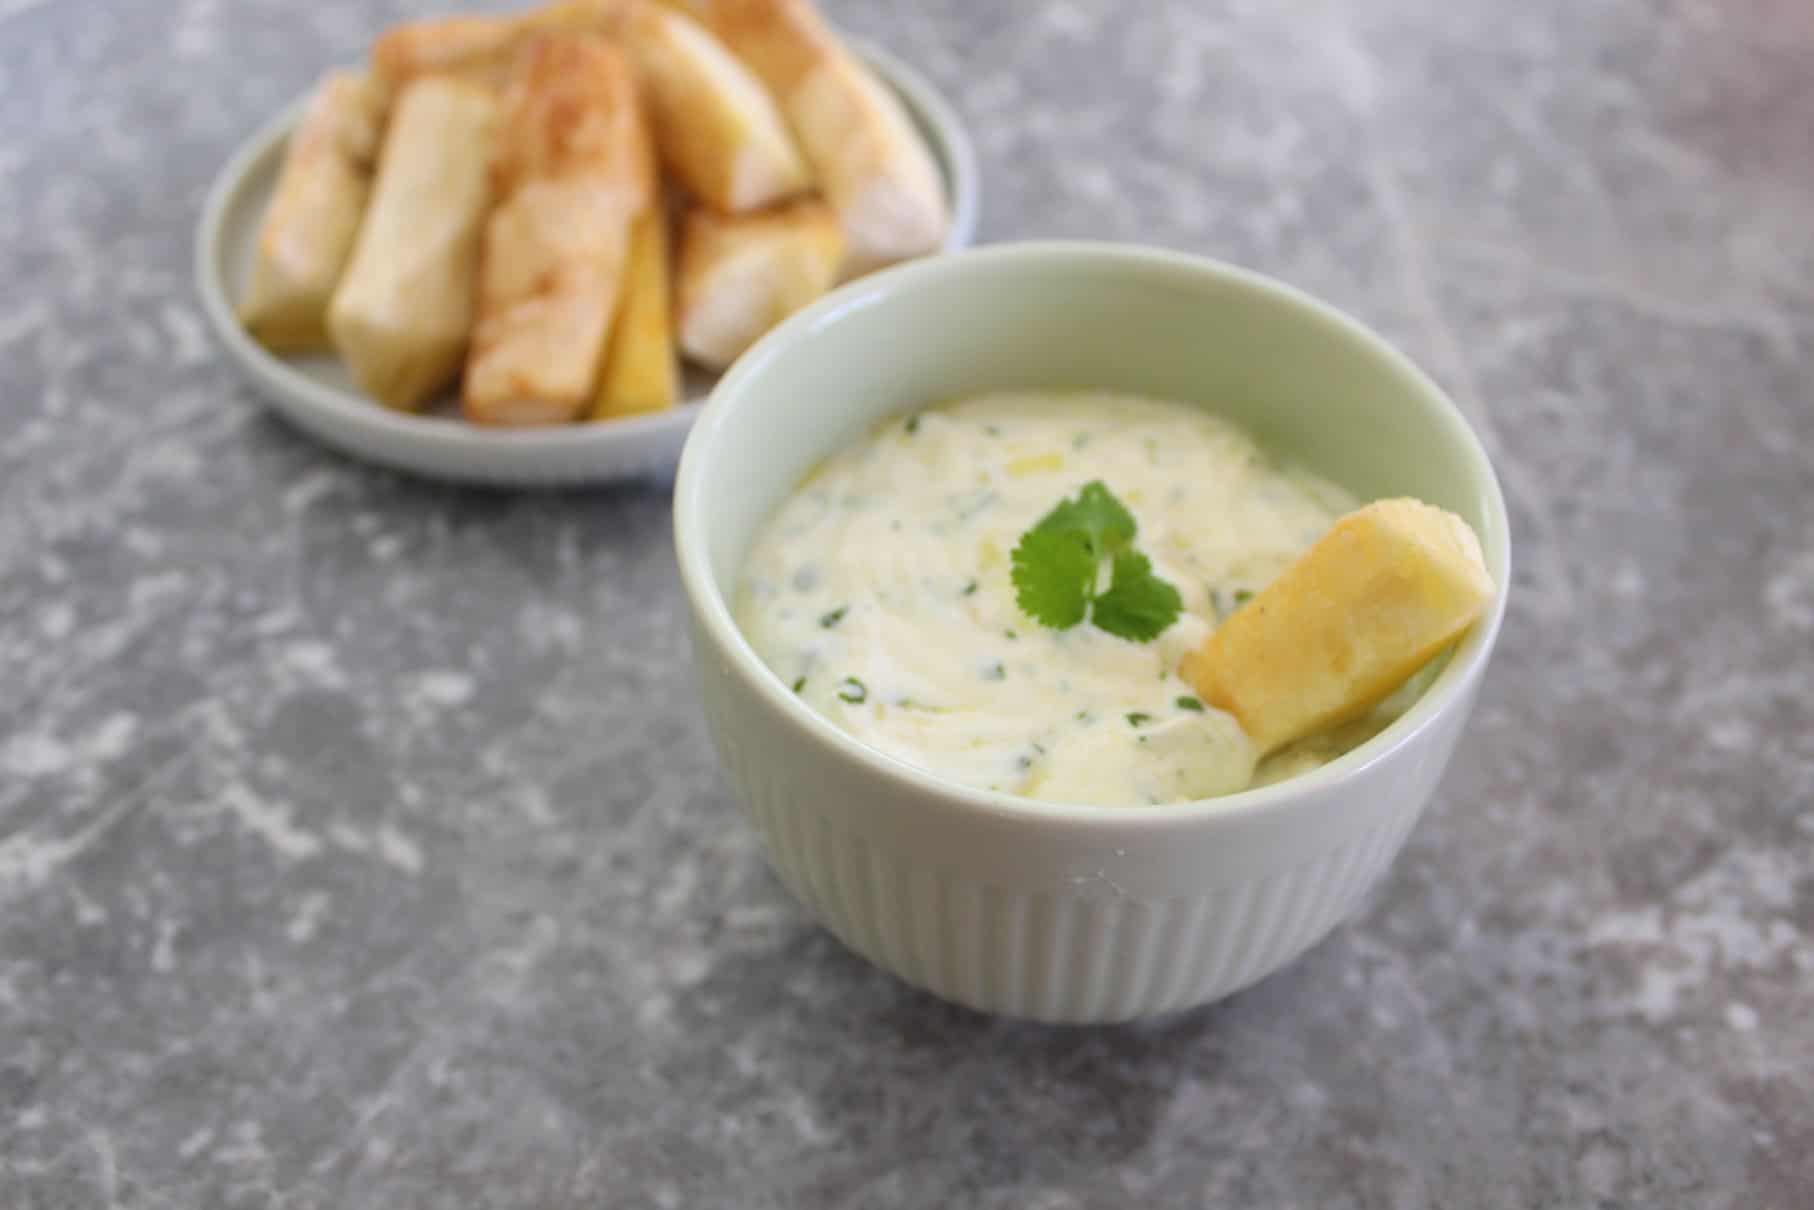 Yogurt based dip with cilantro, shown with fried yucca. One yucca stick is dipped in the dip while the plate of fried yucca is shown behind the dip.